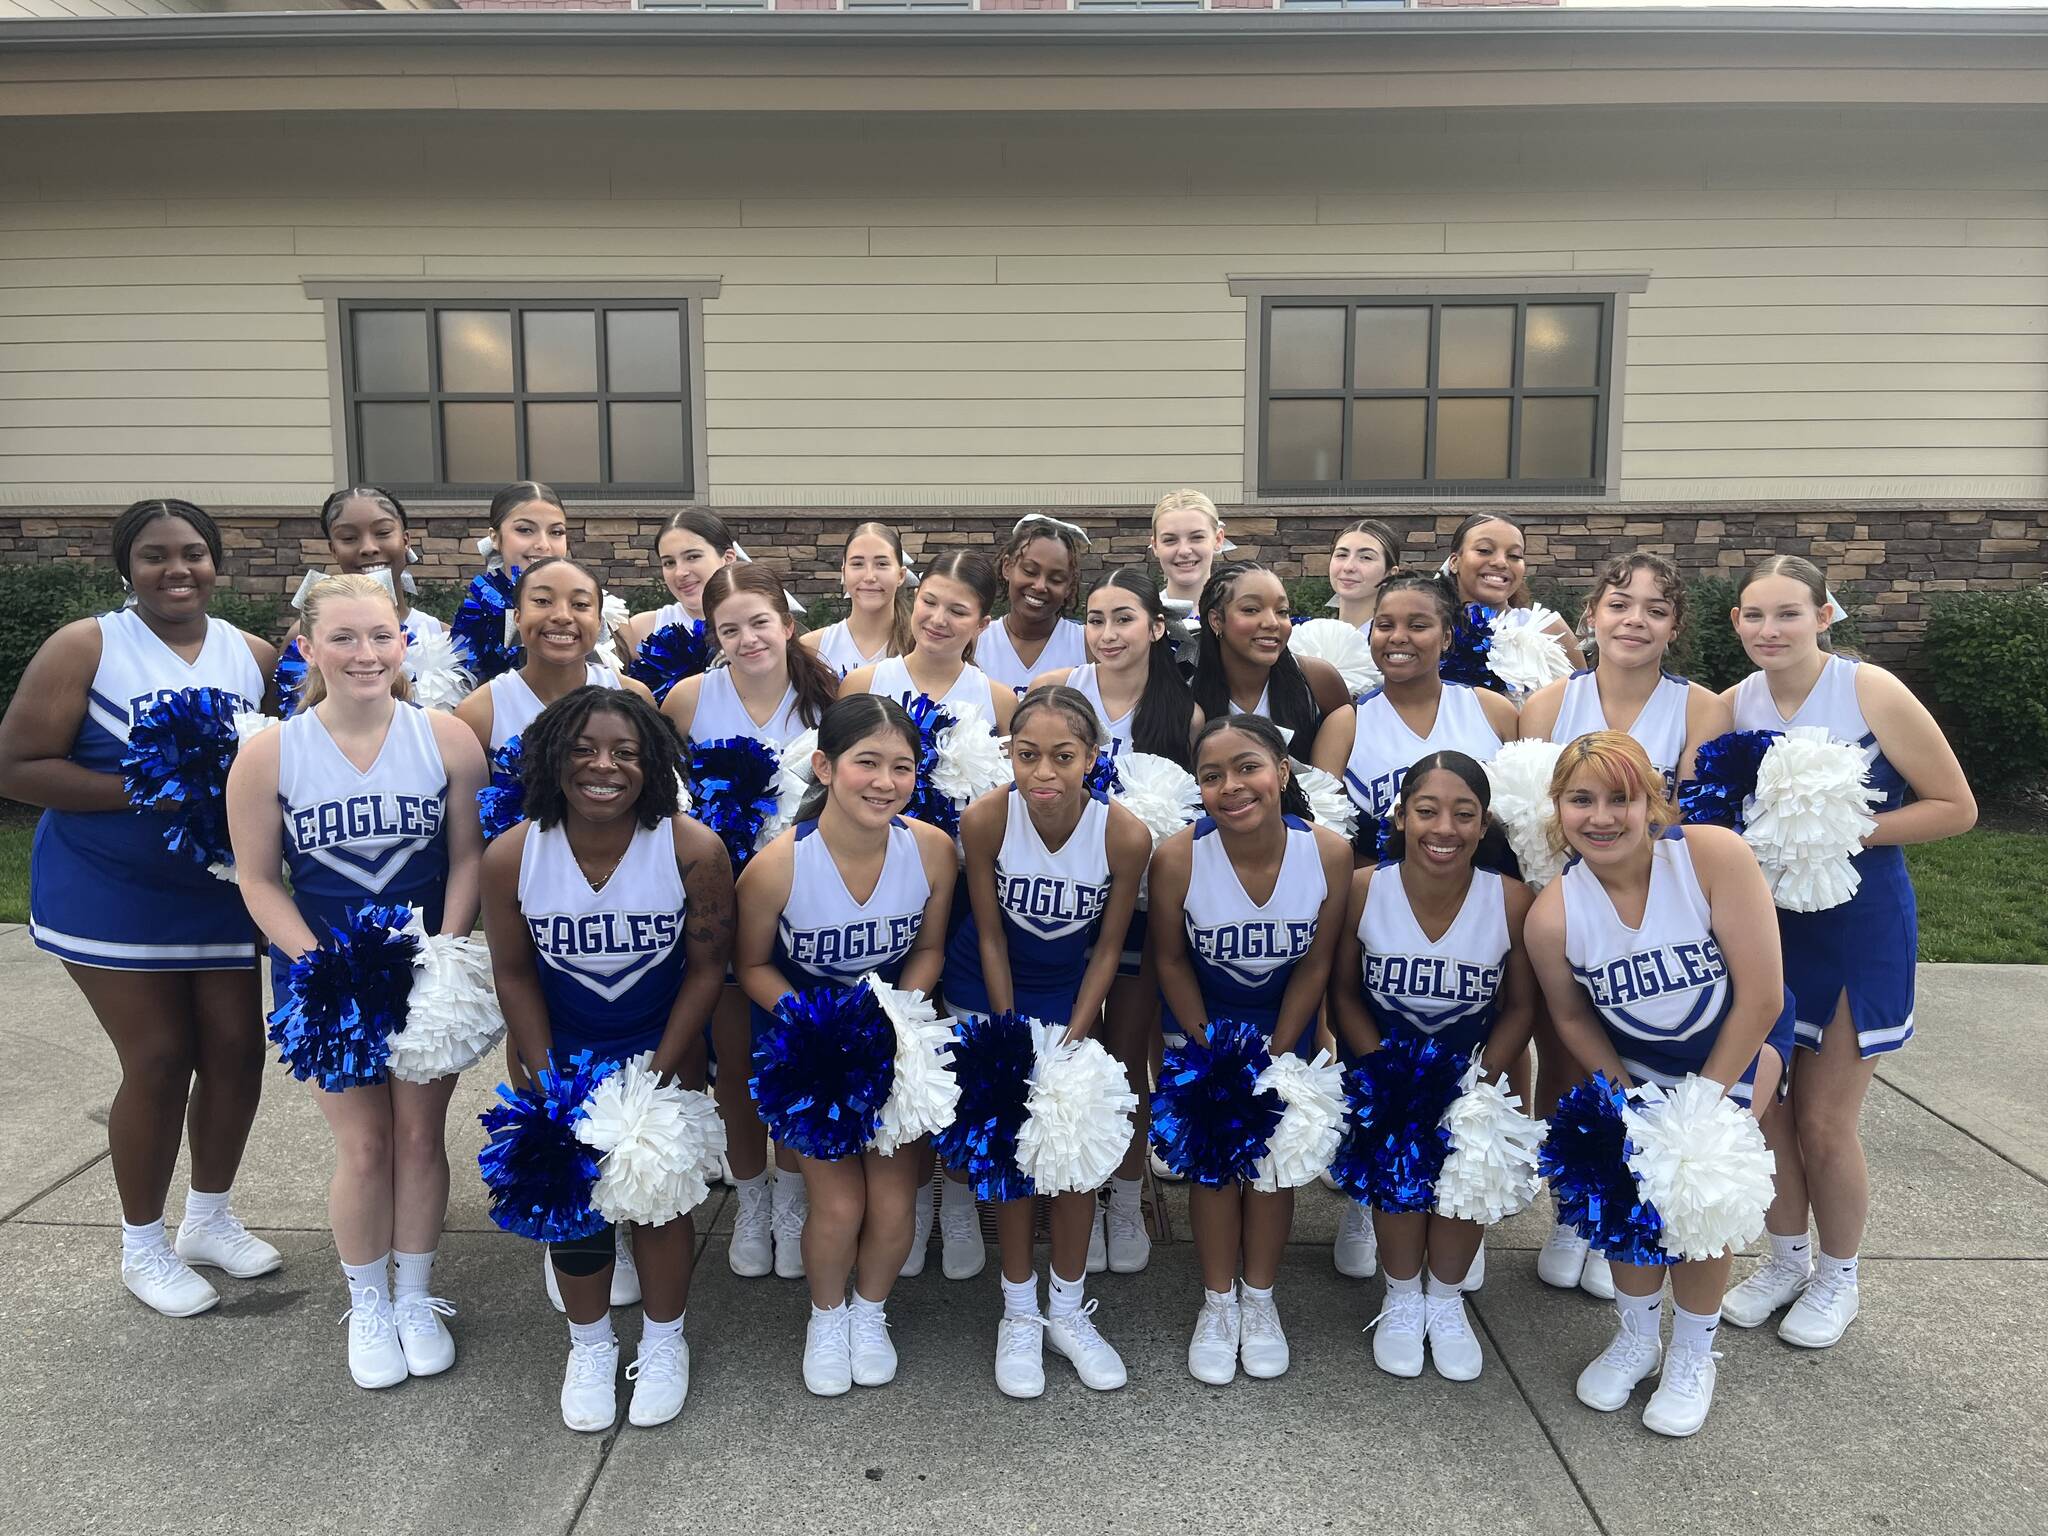 Federal Way High School cheer team. Photo provided by FWHS